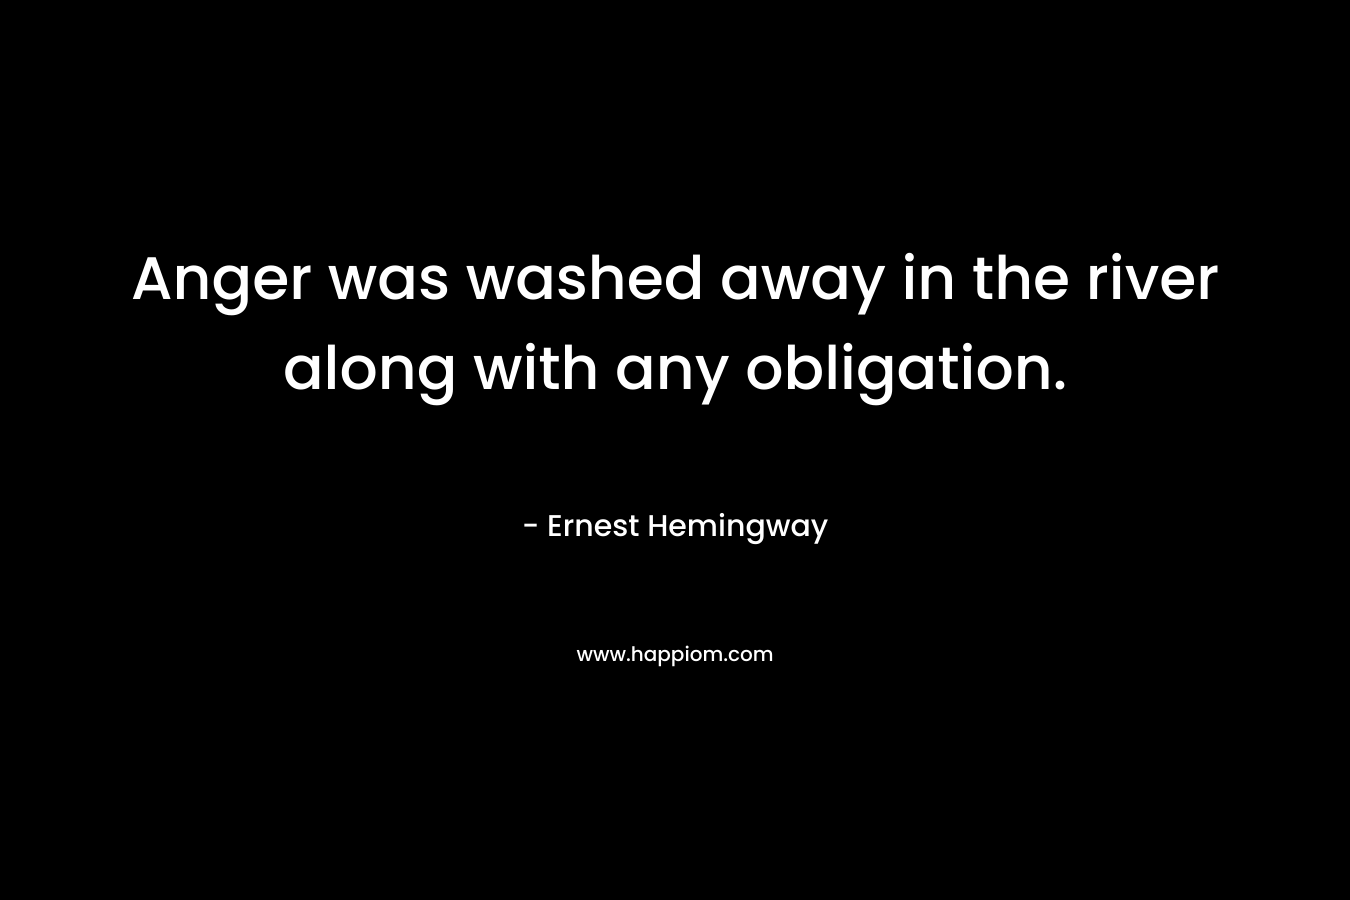 Anger was washed away in the river along with any obligation. – Ernest Hemingway